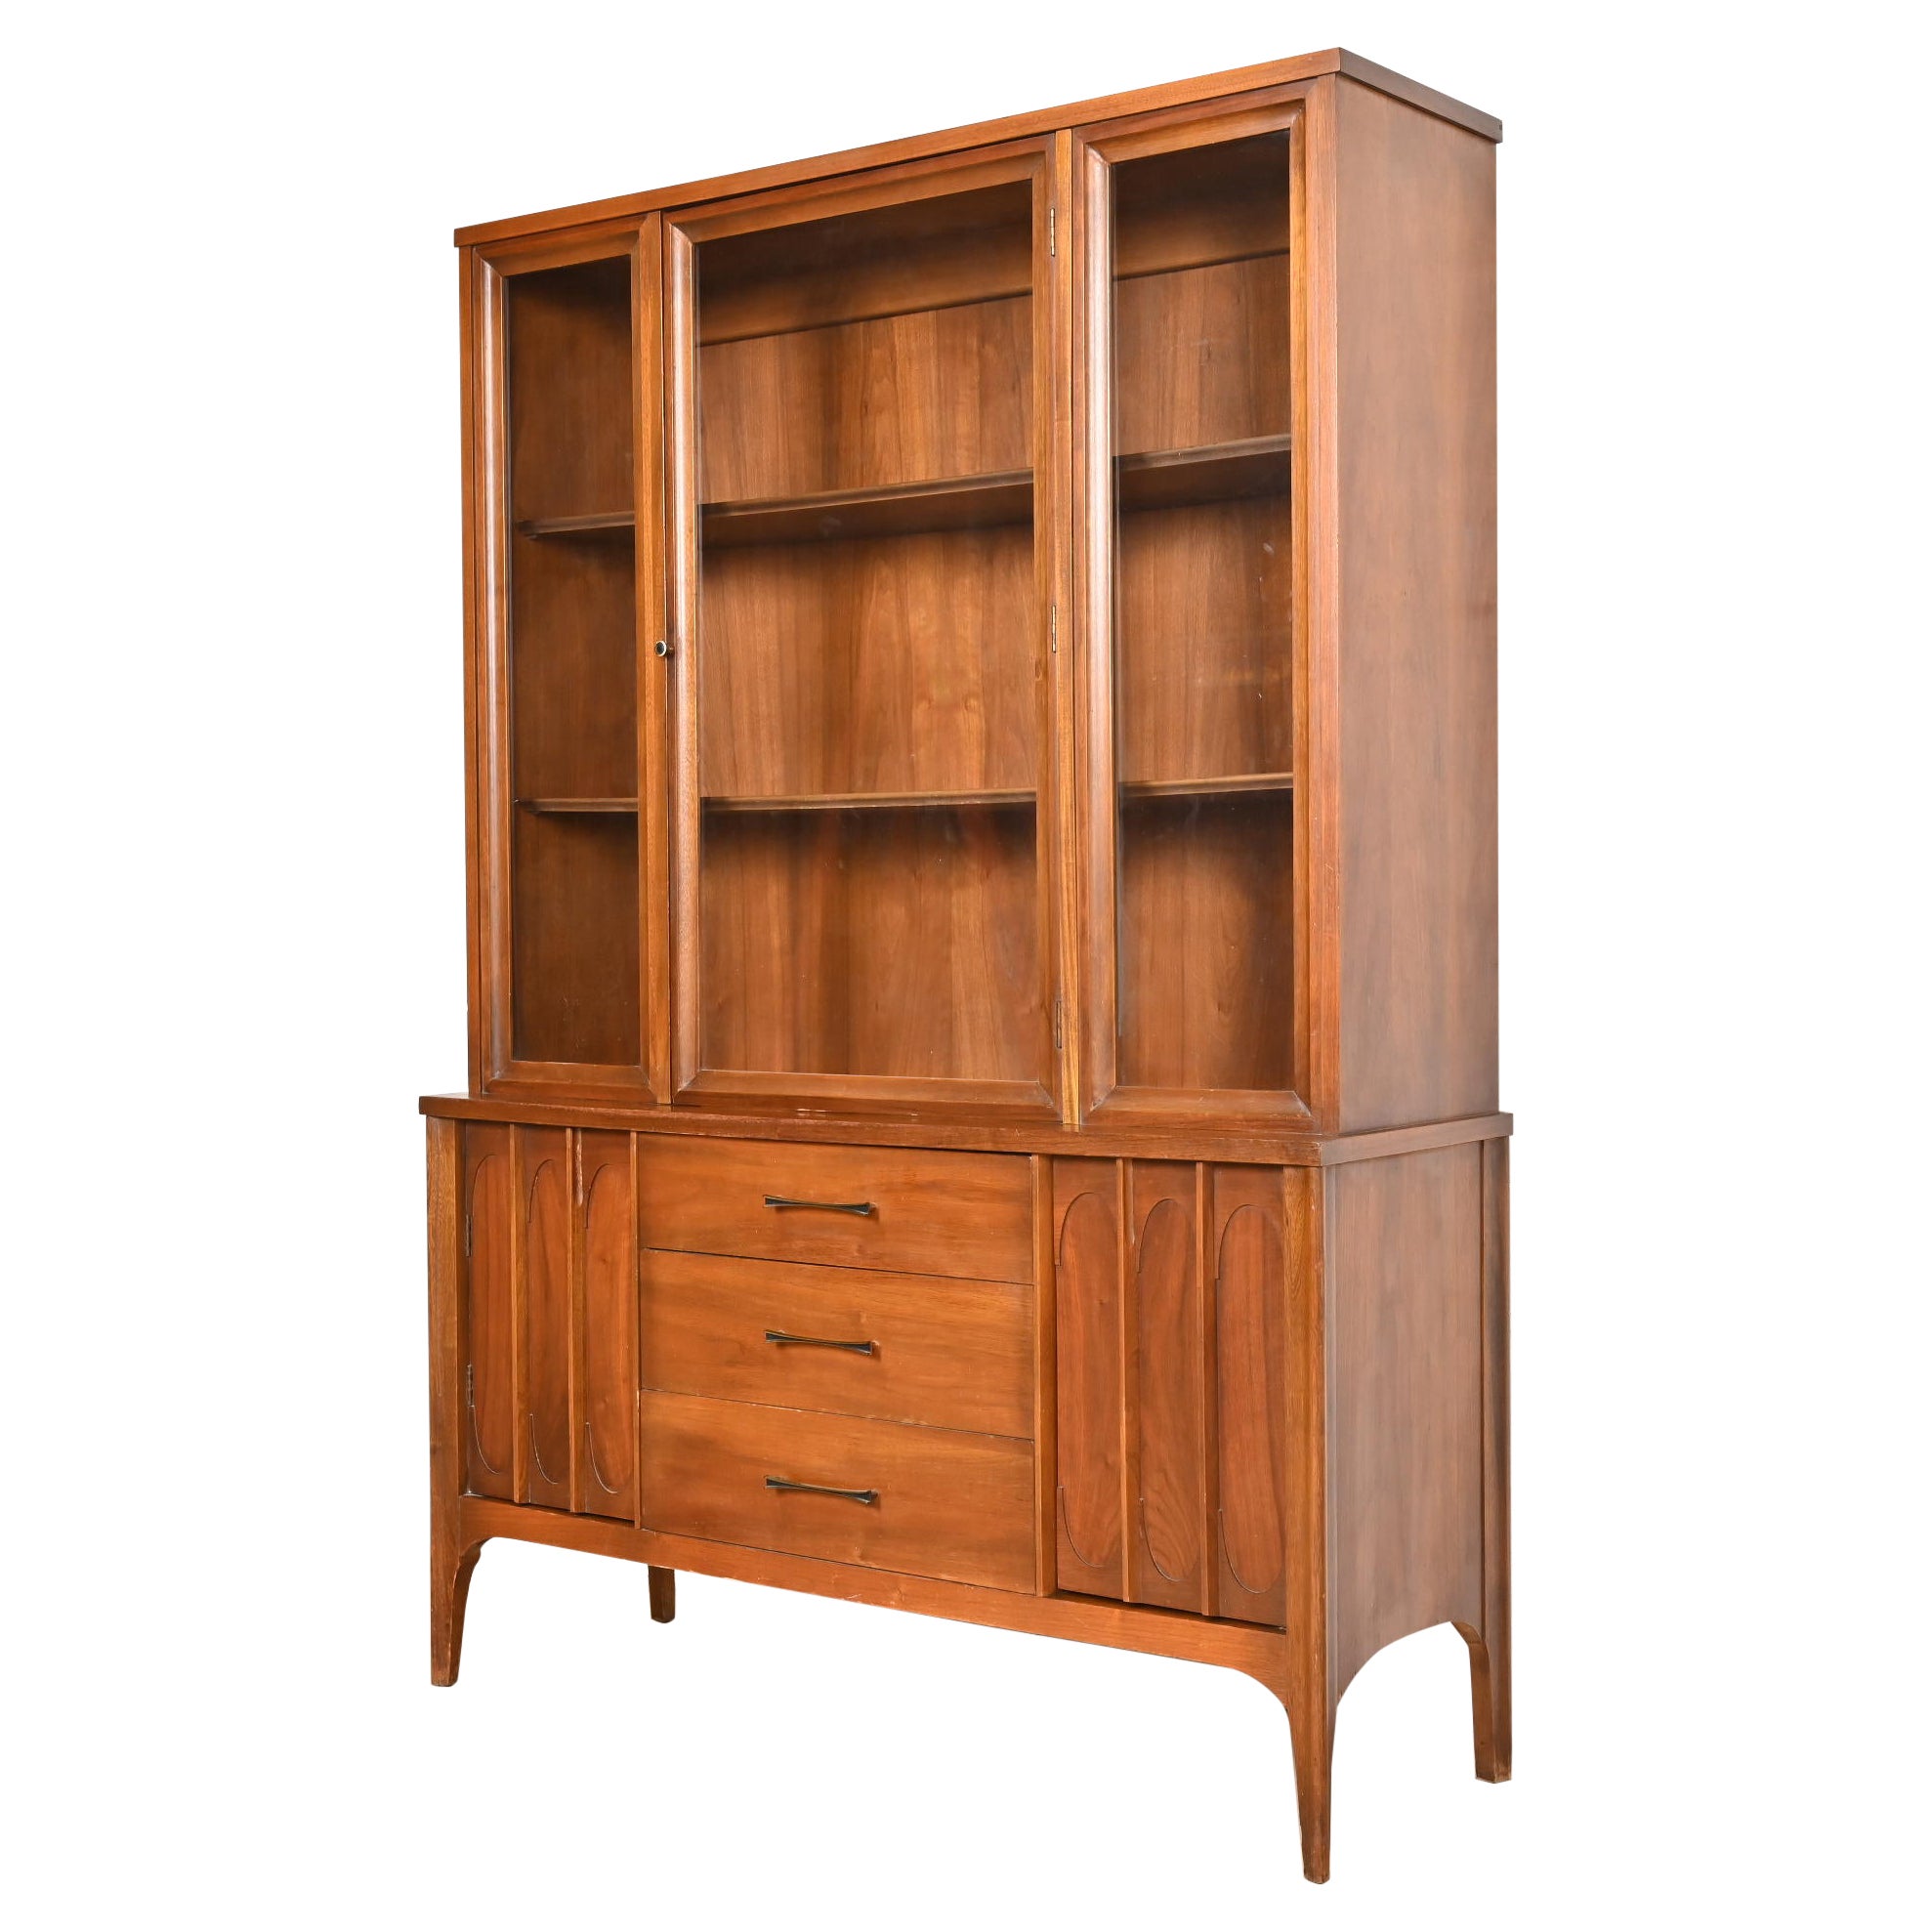 Broyhill Brasilia Style Sculpted Walnut Breakfront Bookcase or China Cabinet